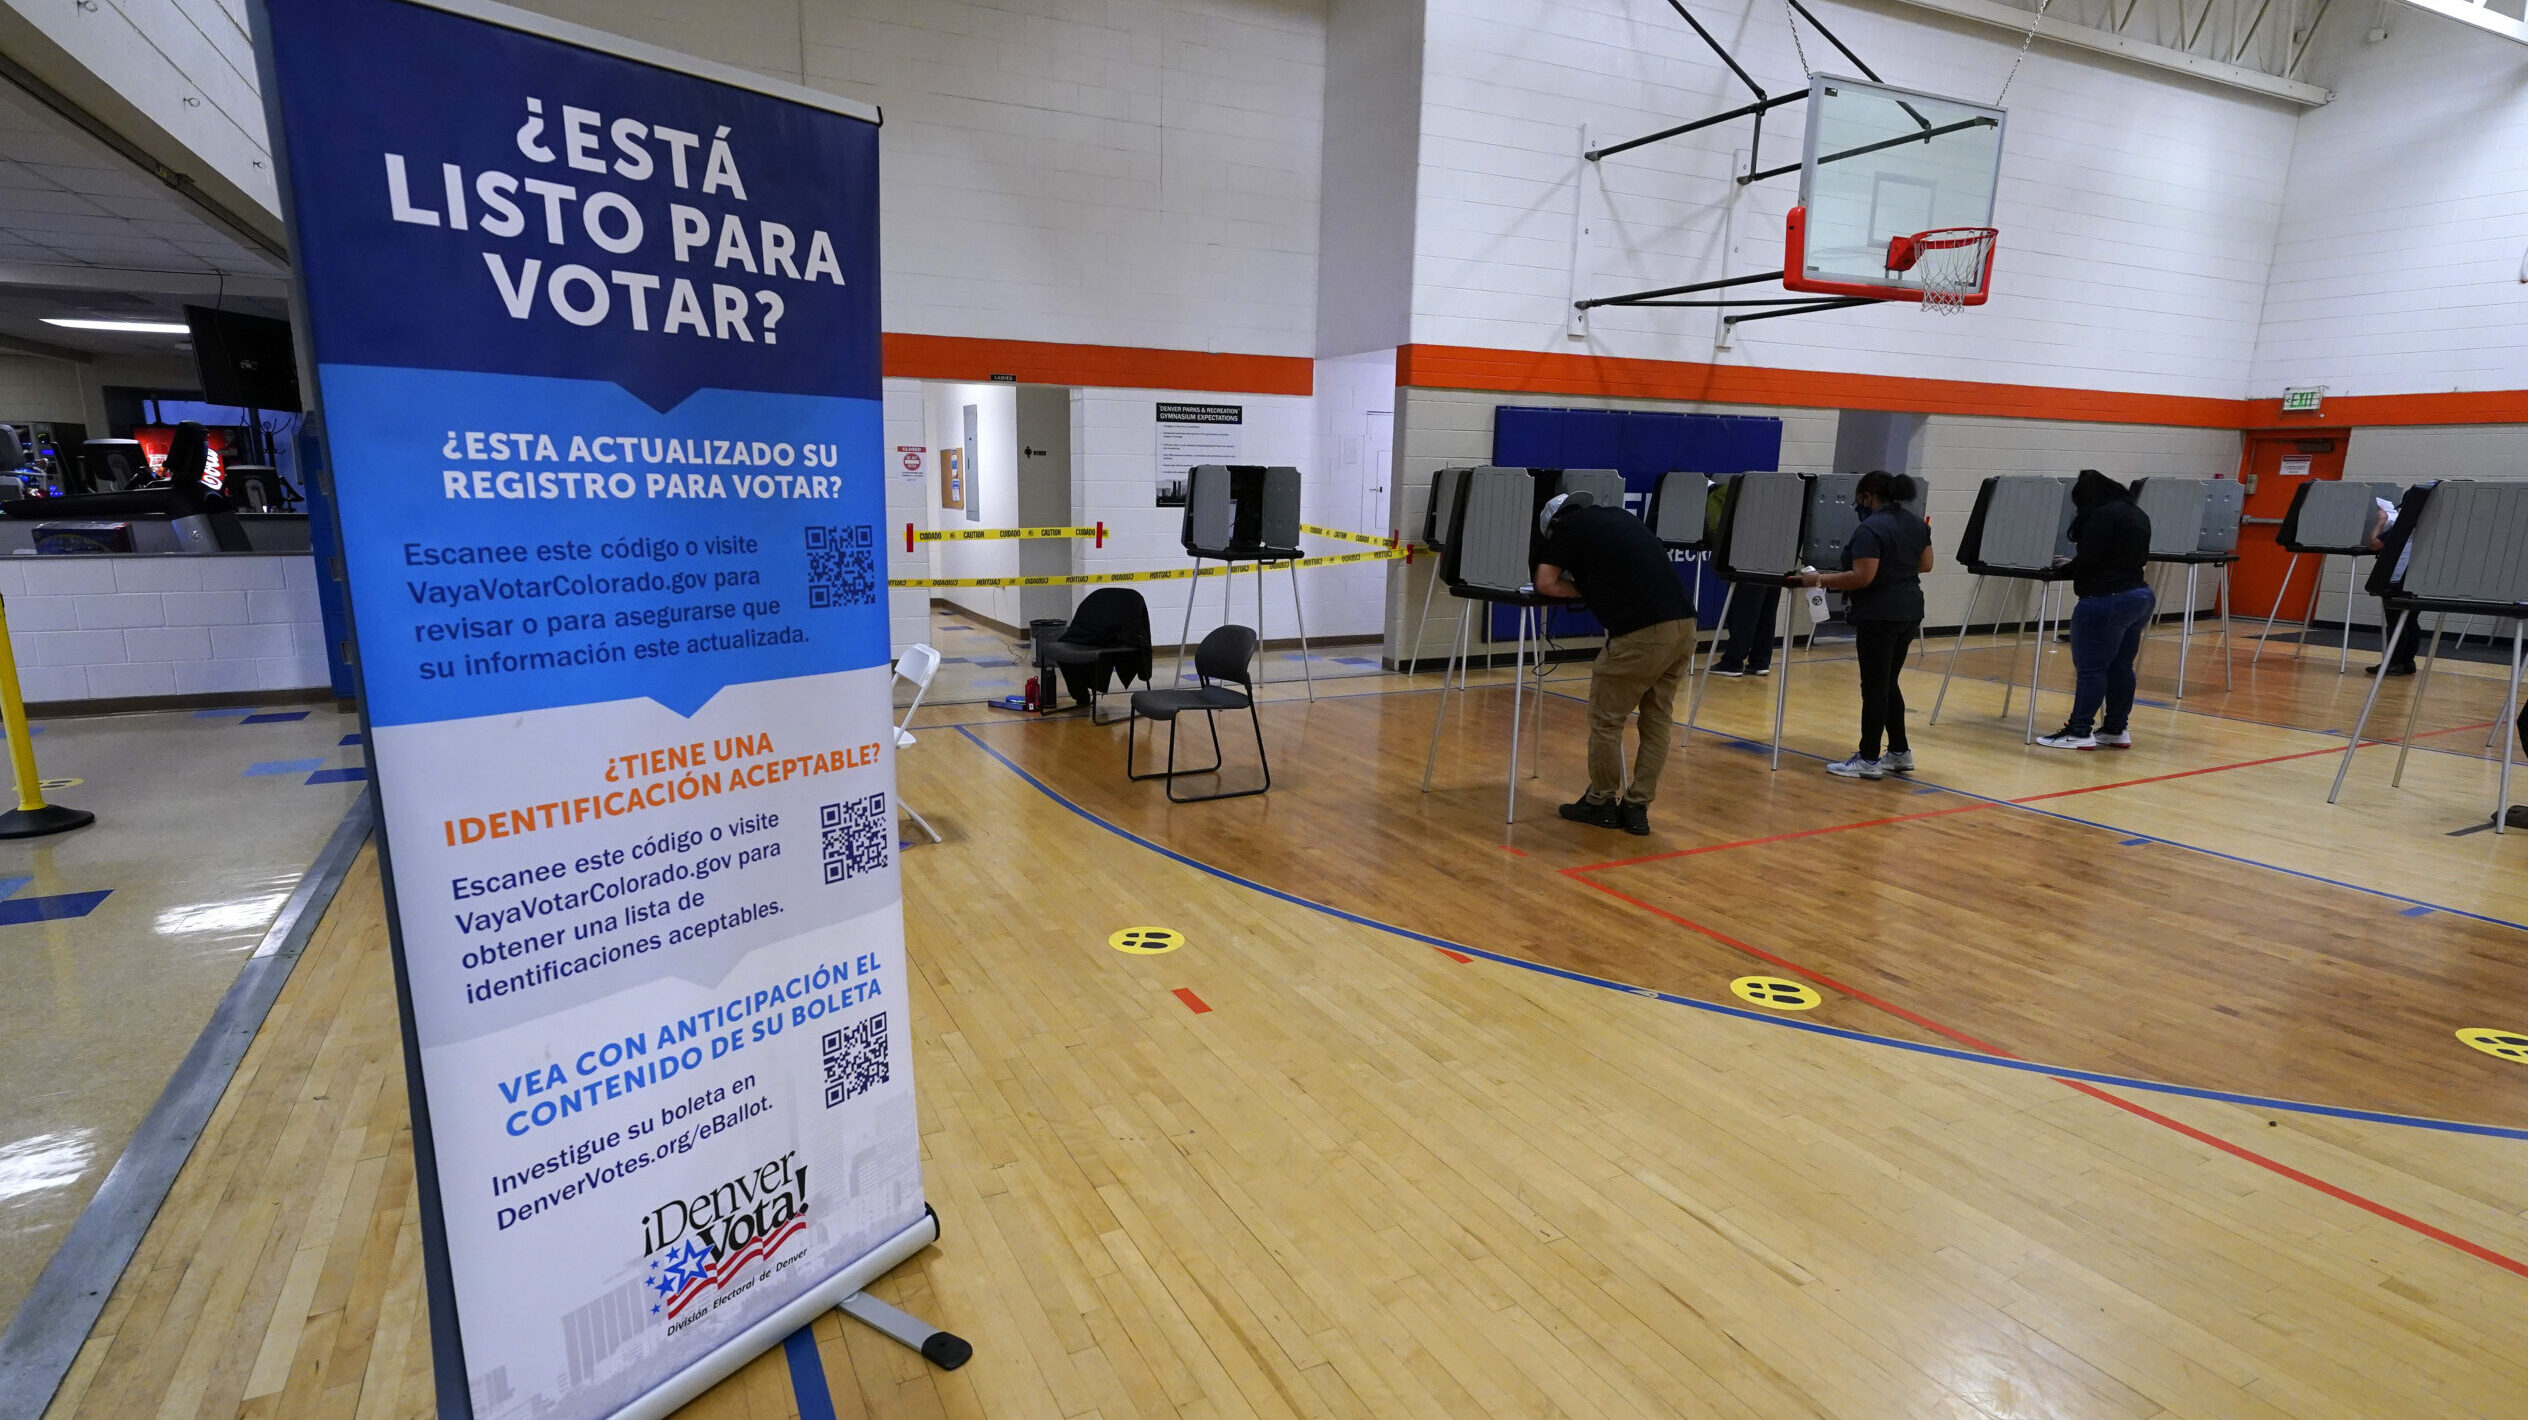 a sign in spanish lists requirements to vote, latino voters are a target for misinformation...